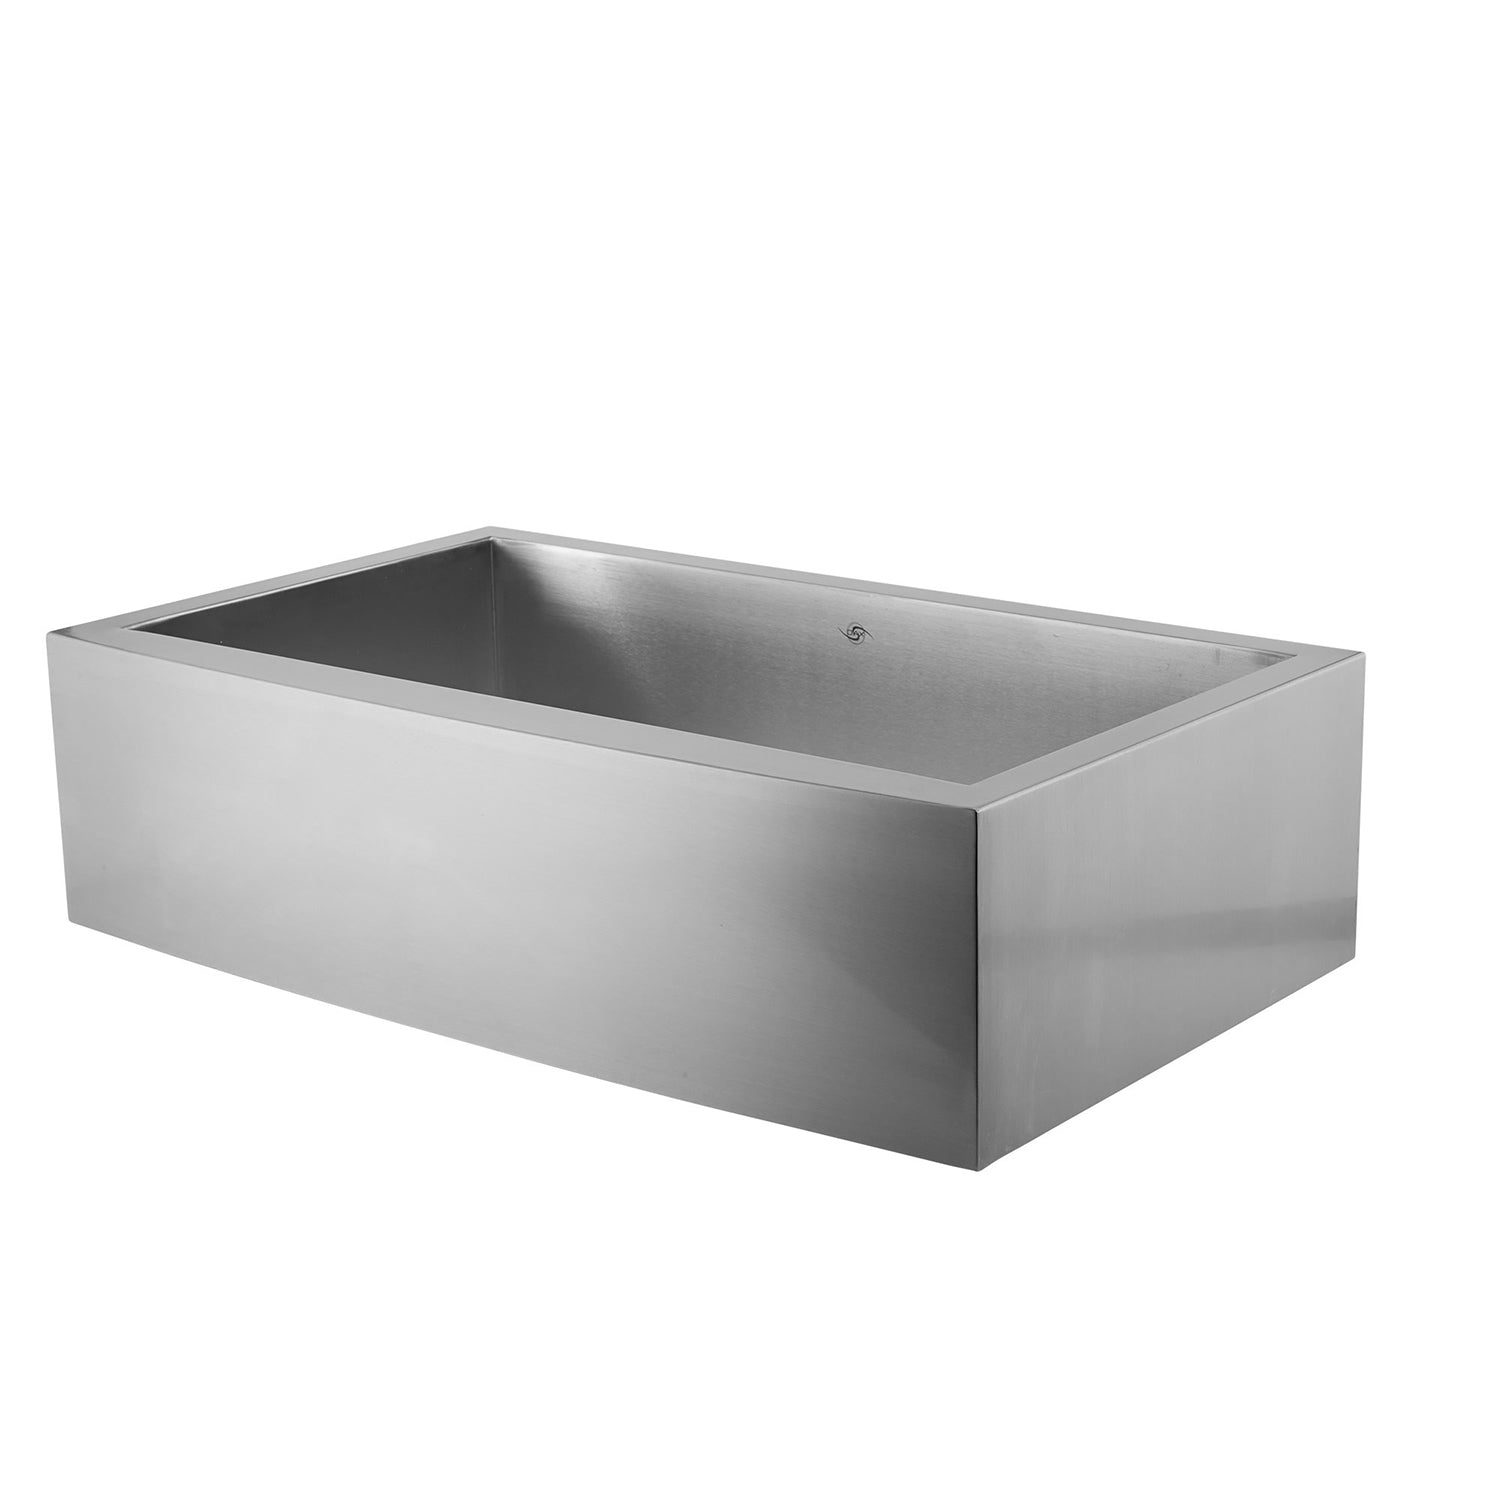 DAX Farmhouse Kitchen Sink, 16 Gauge Stainless Steel, Brushed Finish, 32-7/8 x 20 x 10 Inches (DAX-SQ-3321)